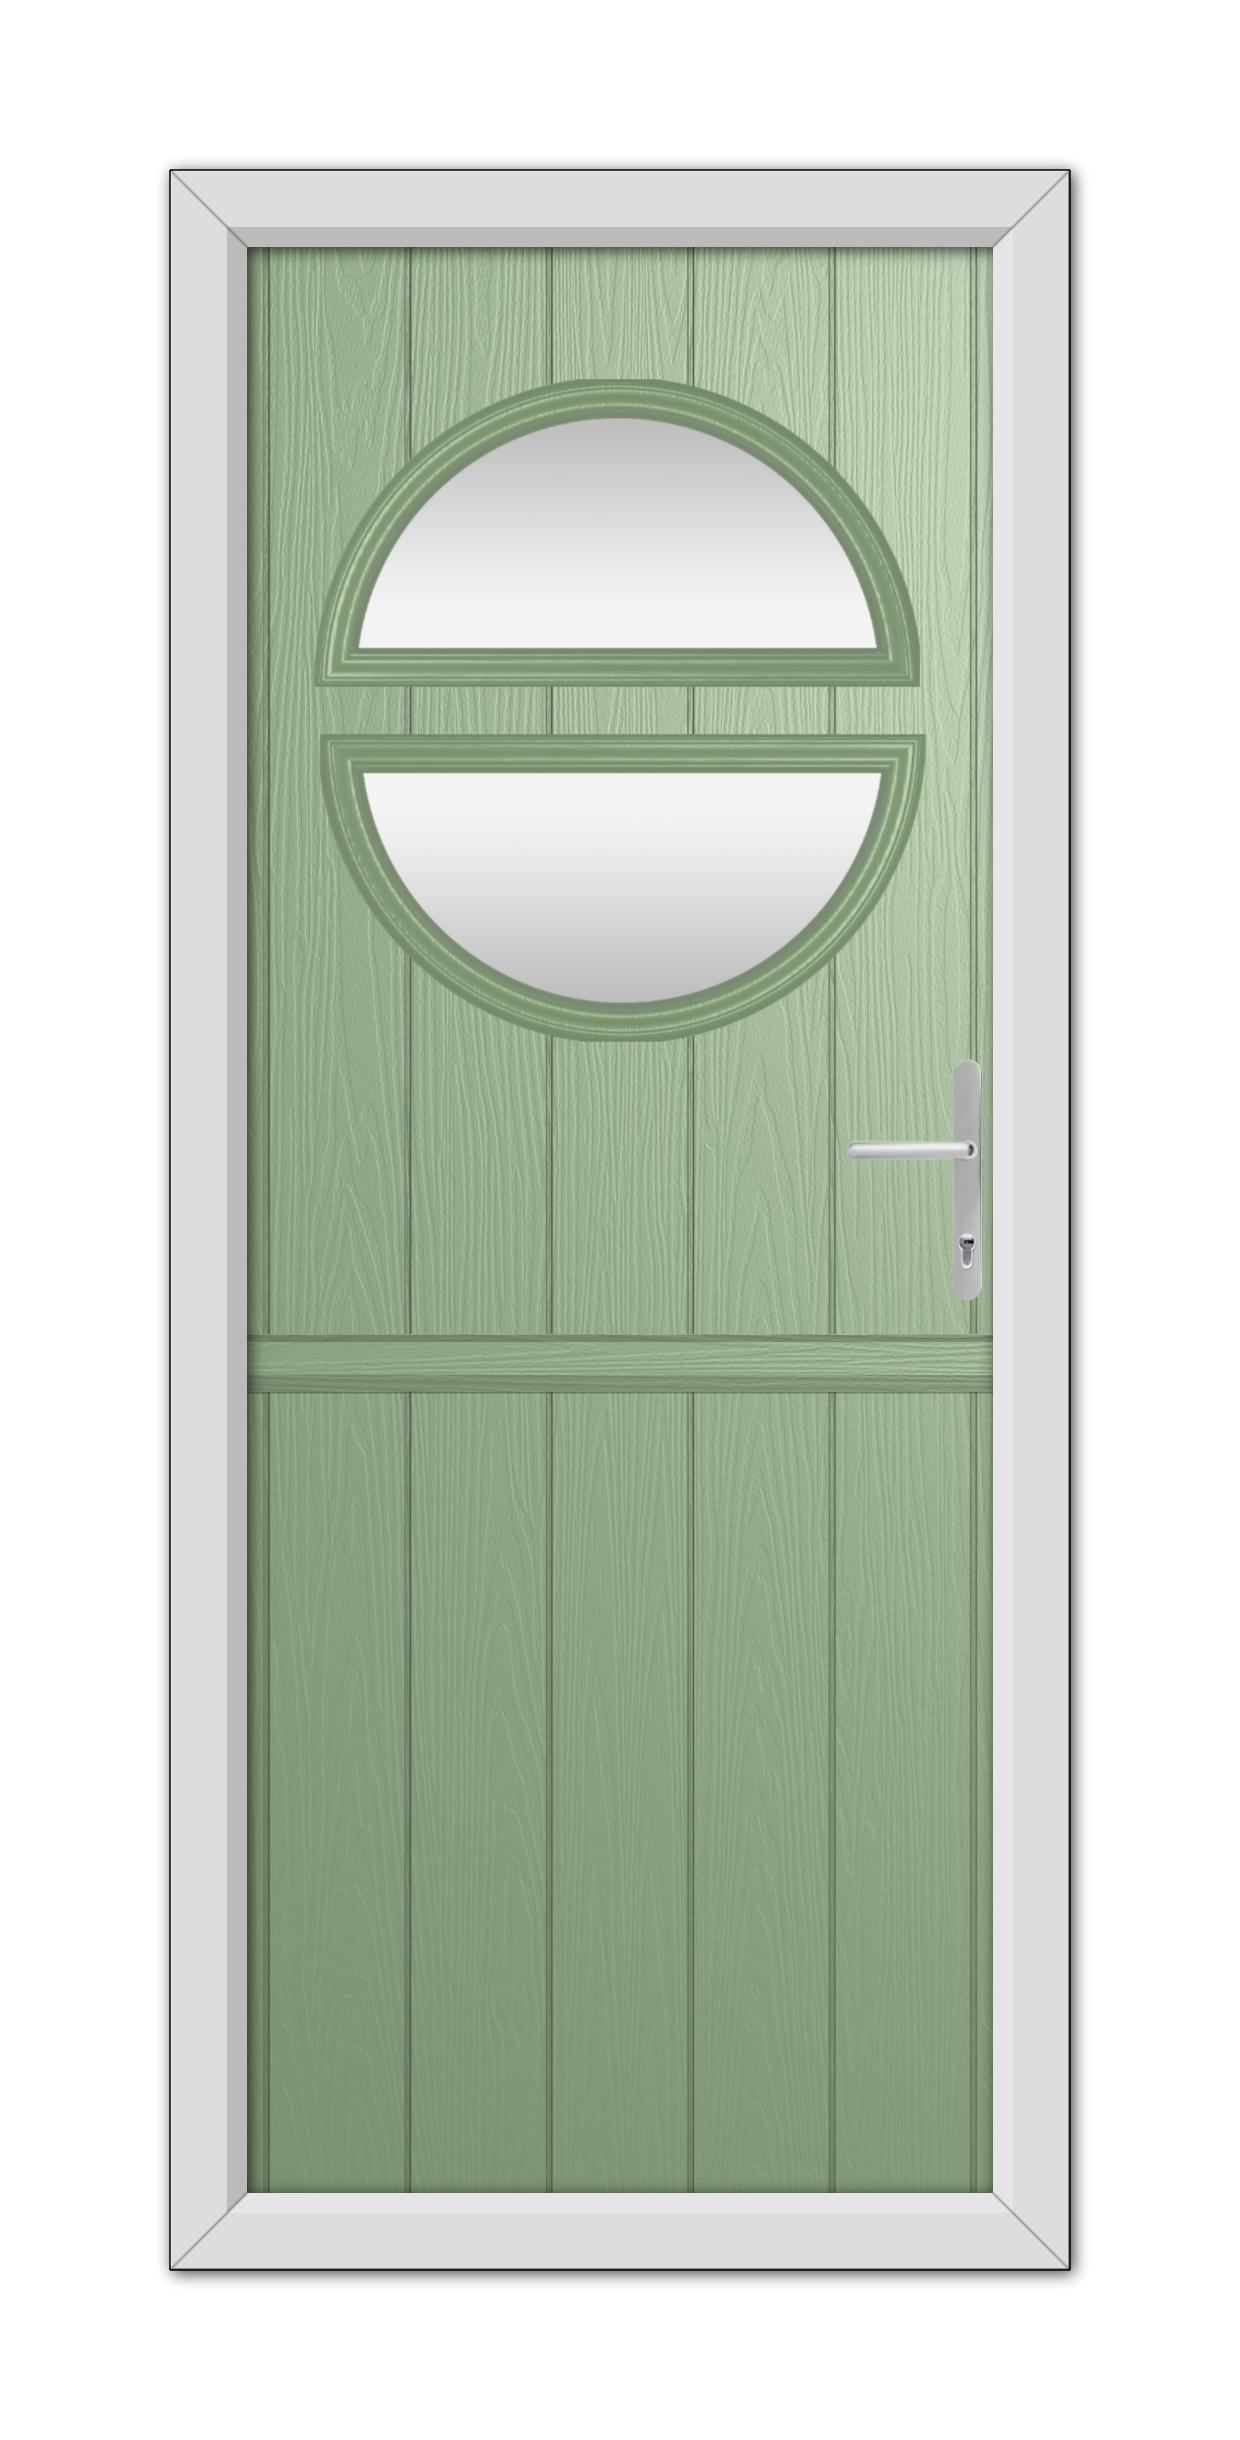 A Chartwell Green Kent Stable Composite Door with an oval glass window on the upper half and a metallic handle on the right side, set within a gray frame.